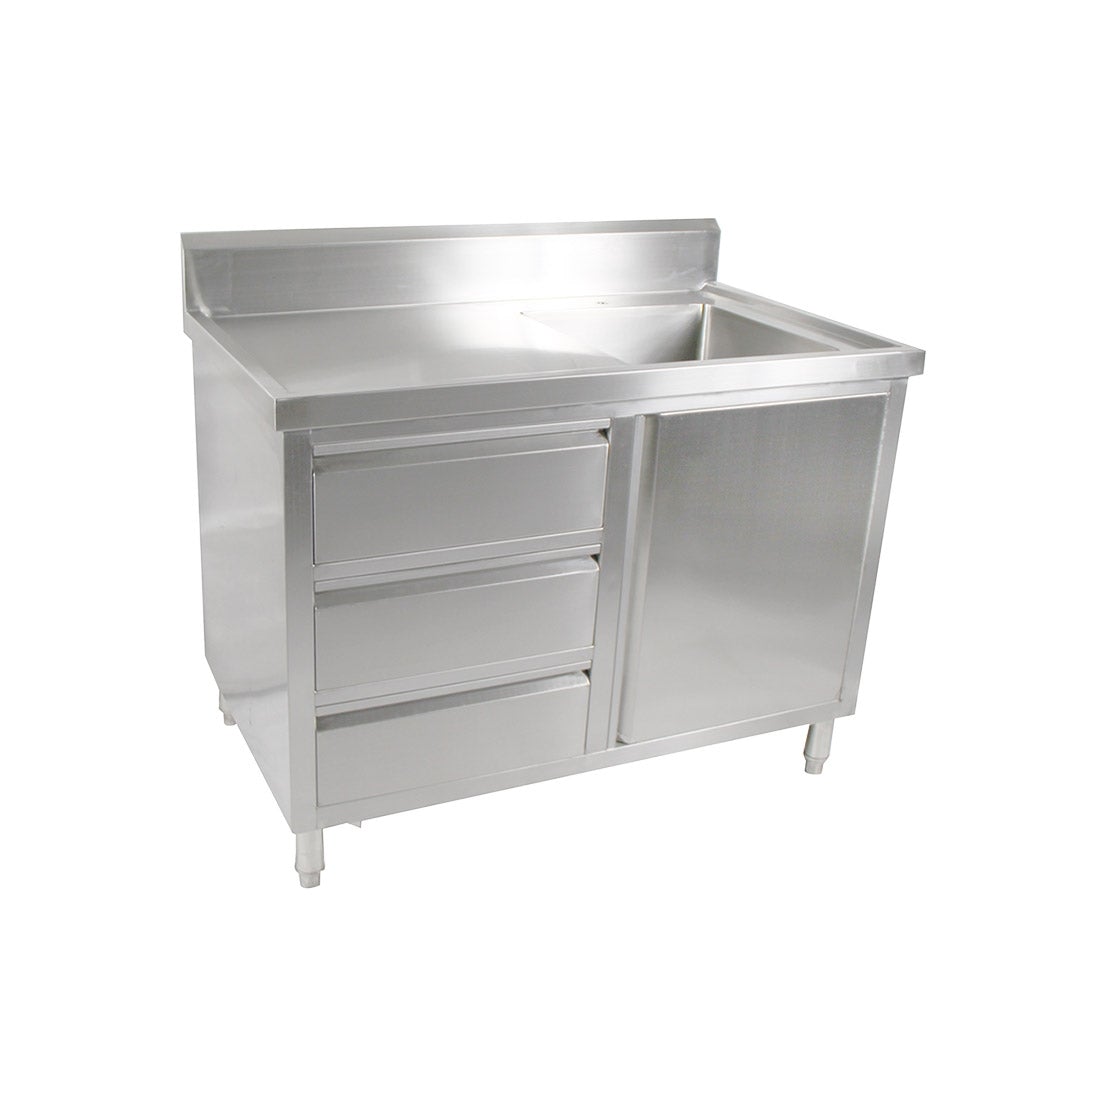 SC-6-1200R-H Cabinet with Right Sink